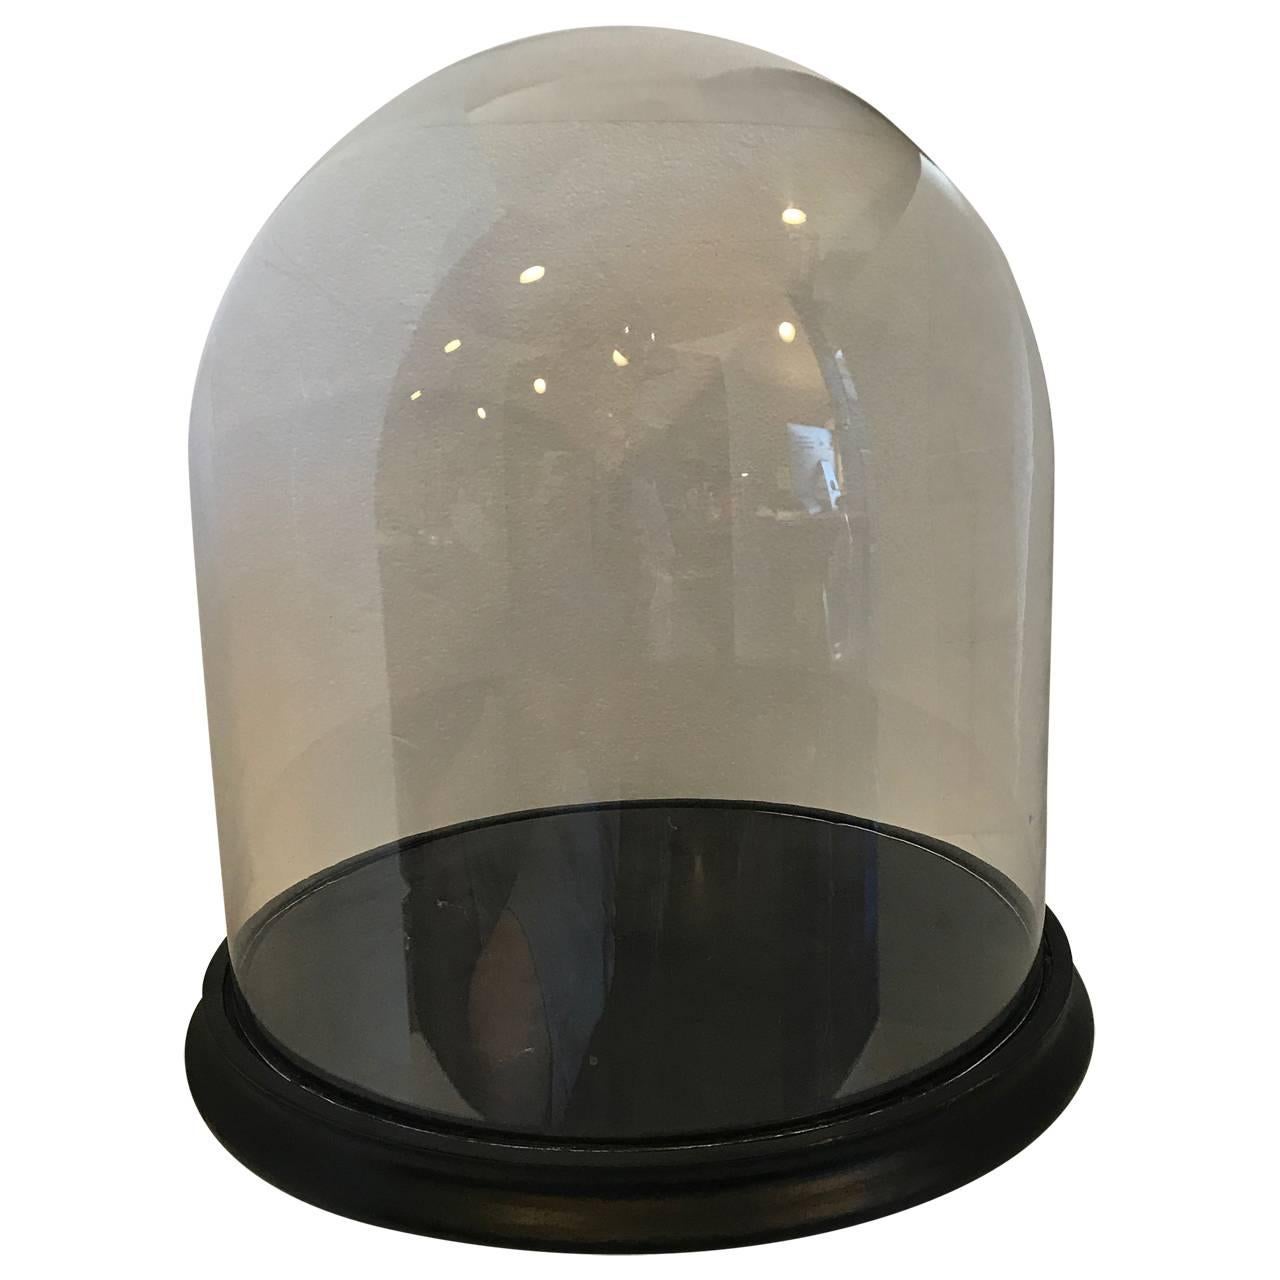 Two old glass dome displays.
The larger one features a thinner glass dome than the other dome.
Dome A, with thicker glass and no feet measures: 
H: 12.8 inches
Diameter: 11.5 inches
Dome B, taller with 3 feet and thinner glass measures:
H: